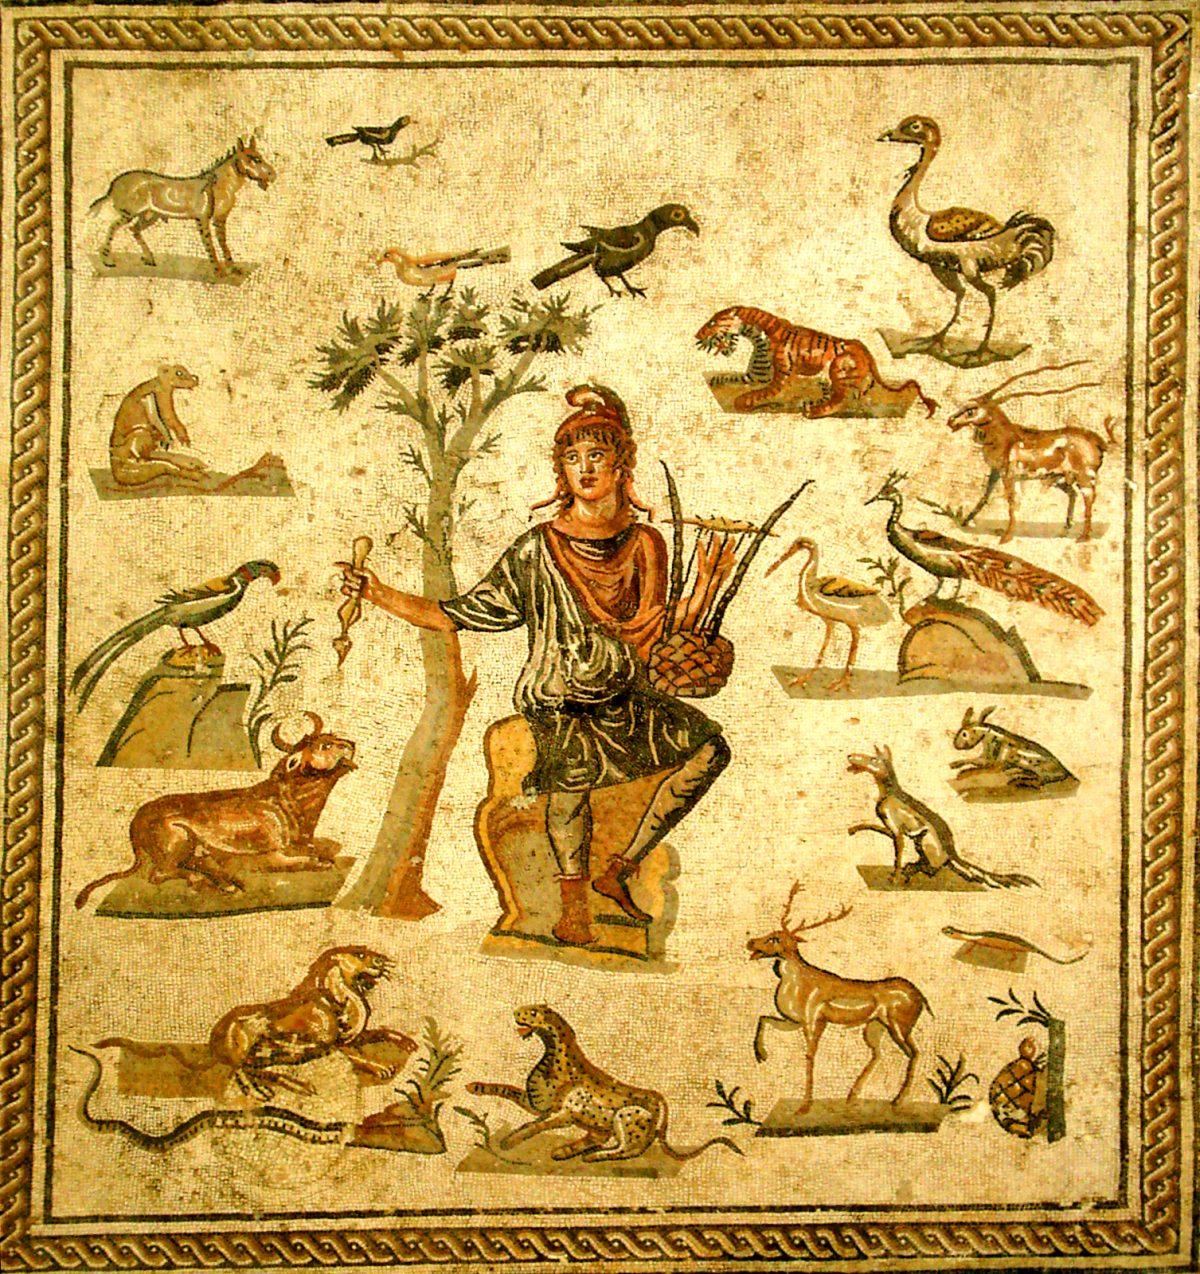 Orpheus’s music was so beautiful it could enchant the animals. Ancient Roman floor mosaic, from Palermo, now in the Regional Archeological Museum Antonio Salinas. (Public Domain)